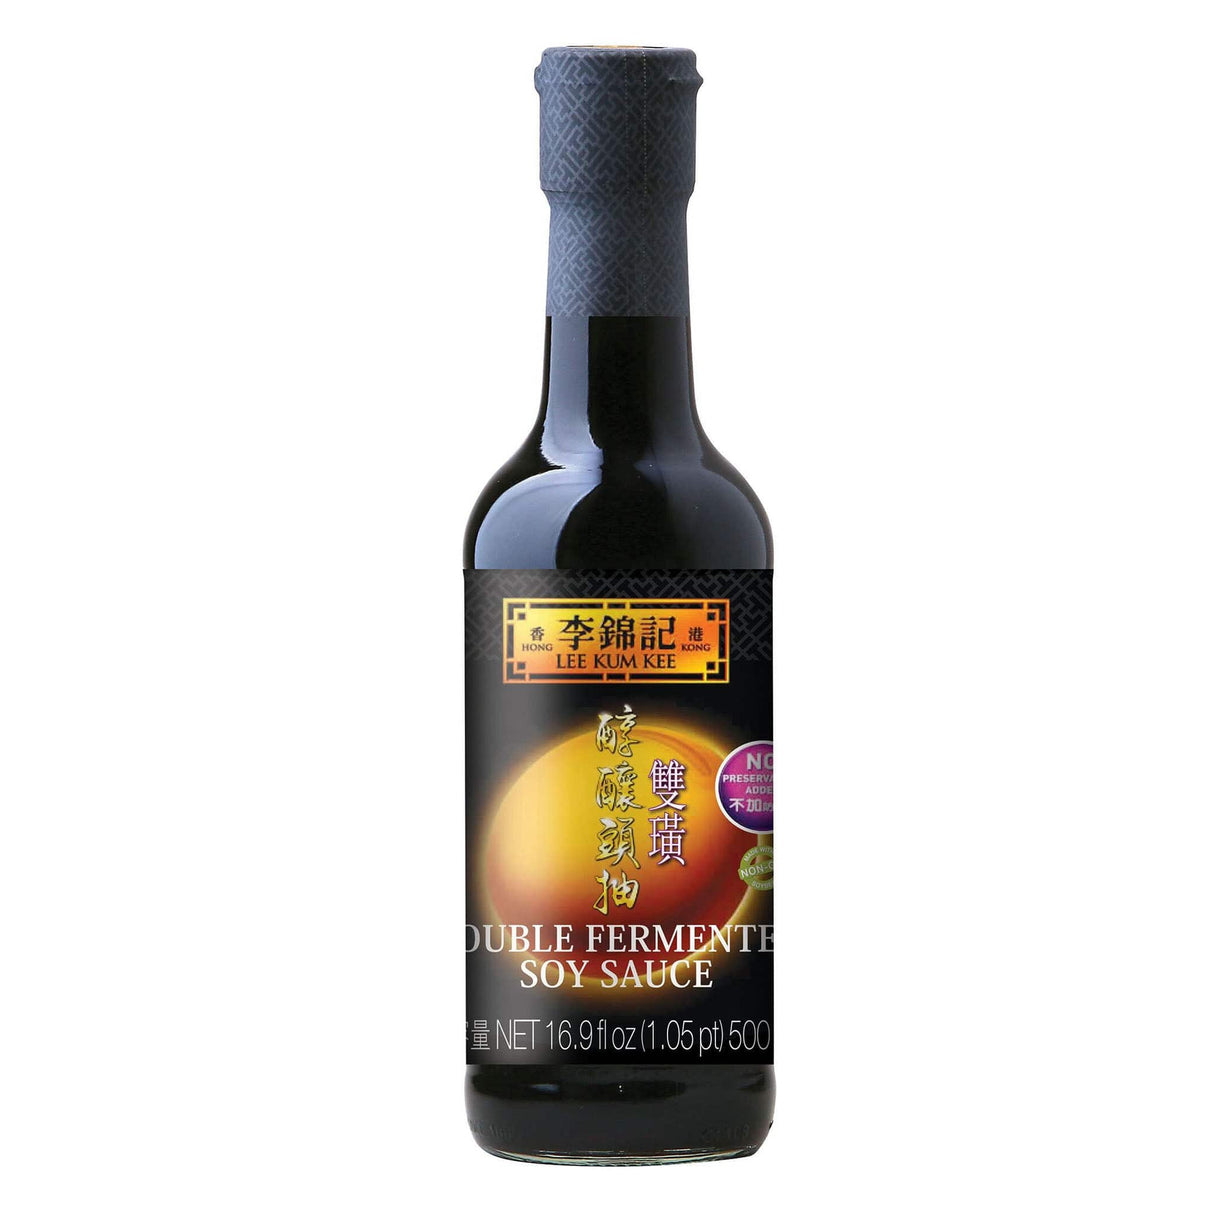 Lee Kum Kee Double Fermented Soy Sauce